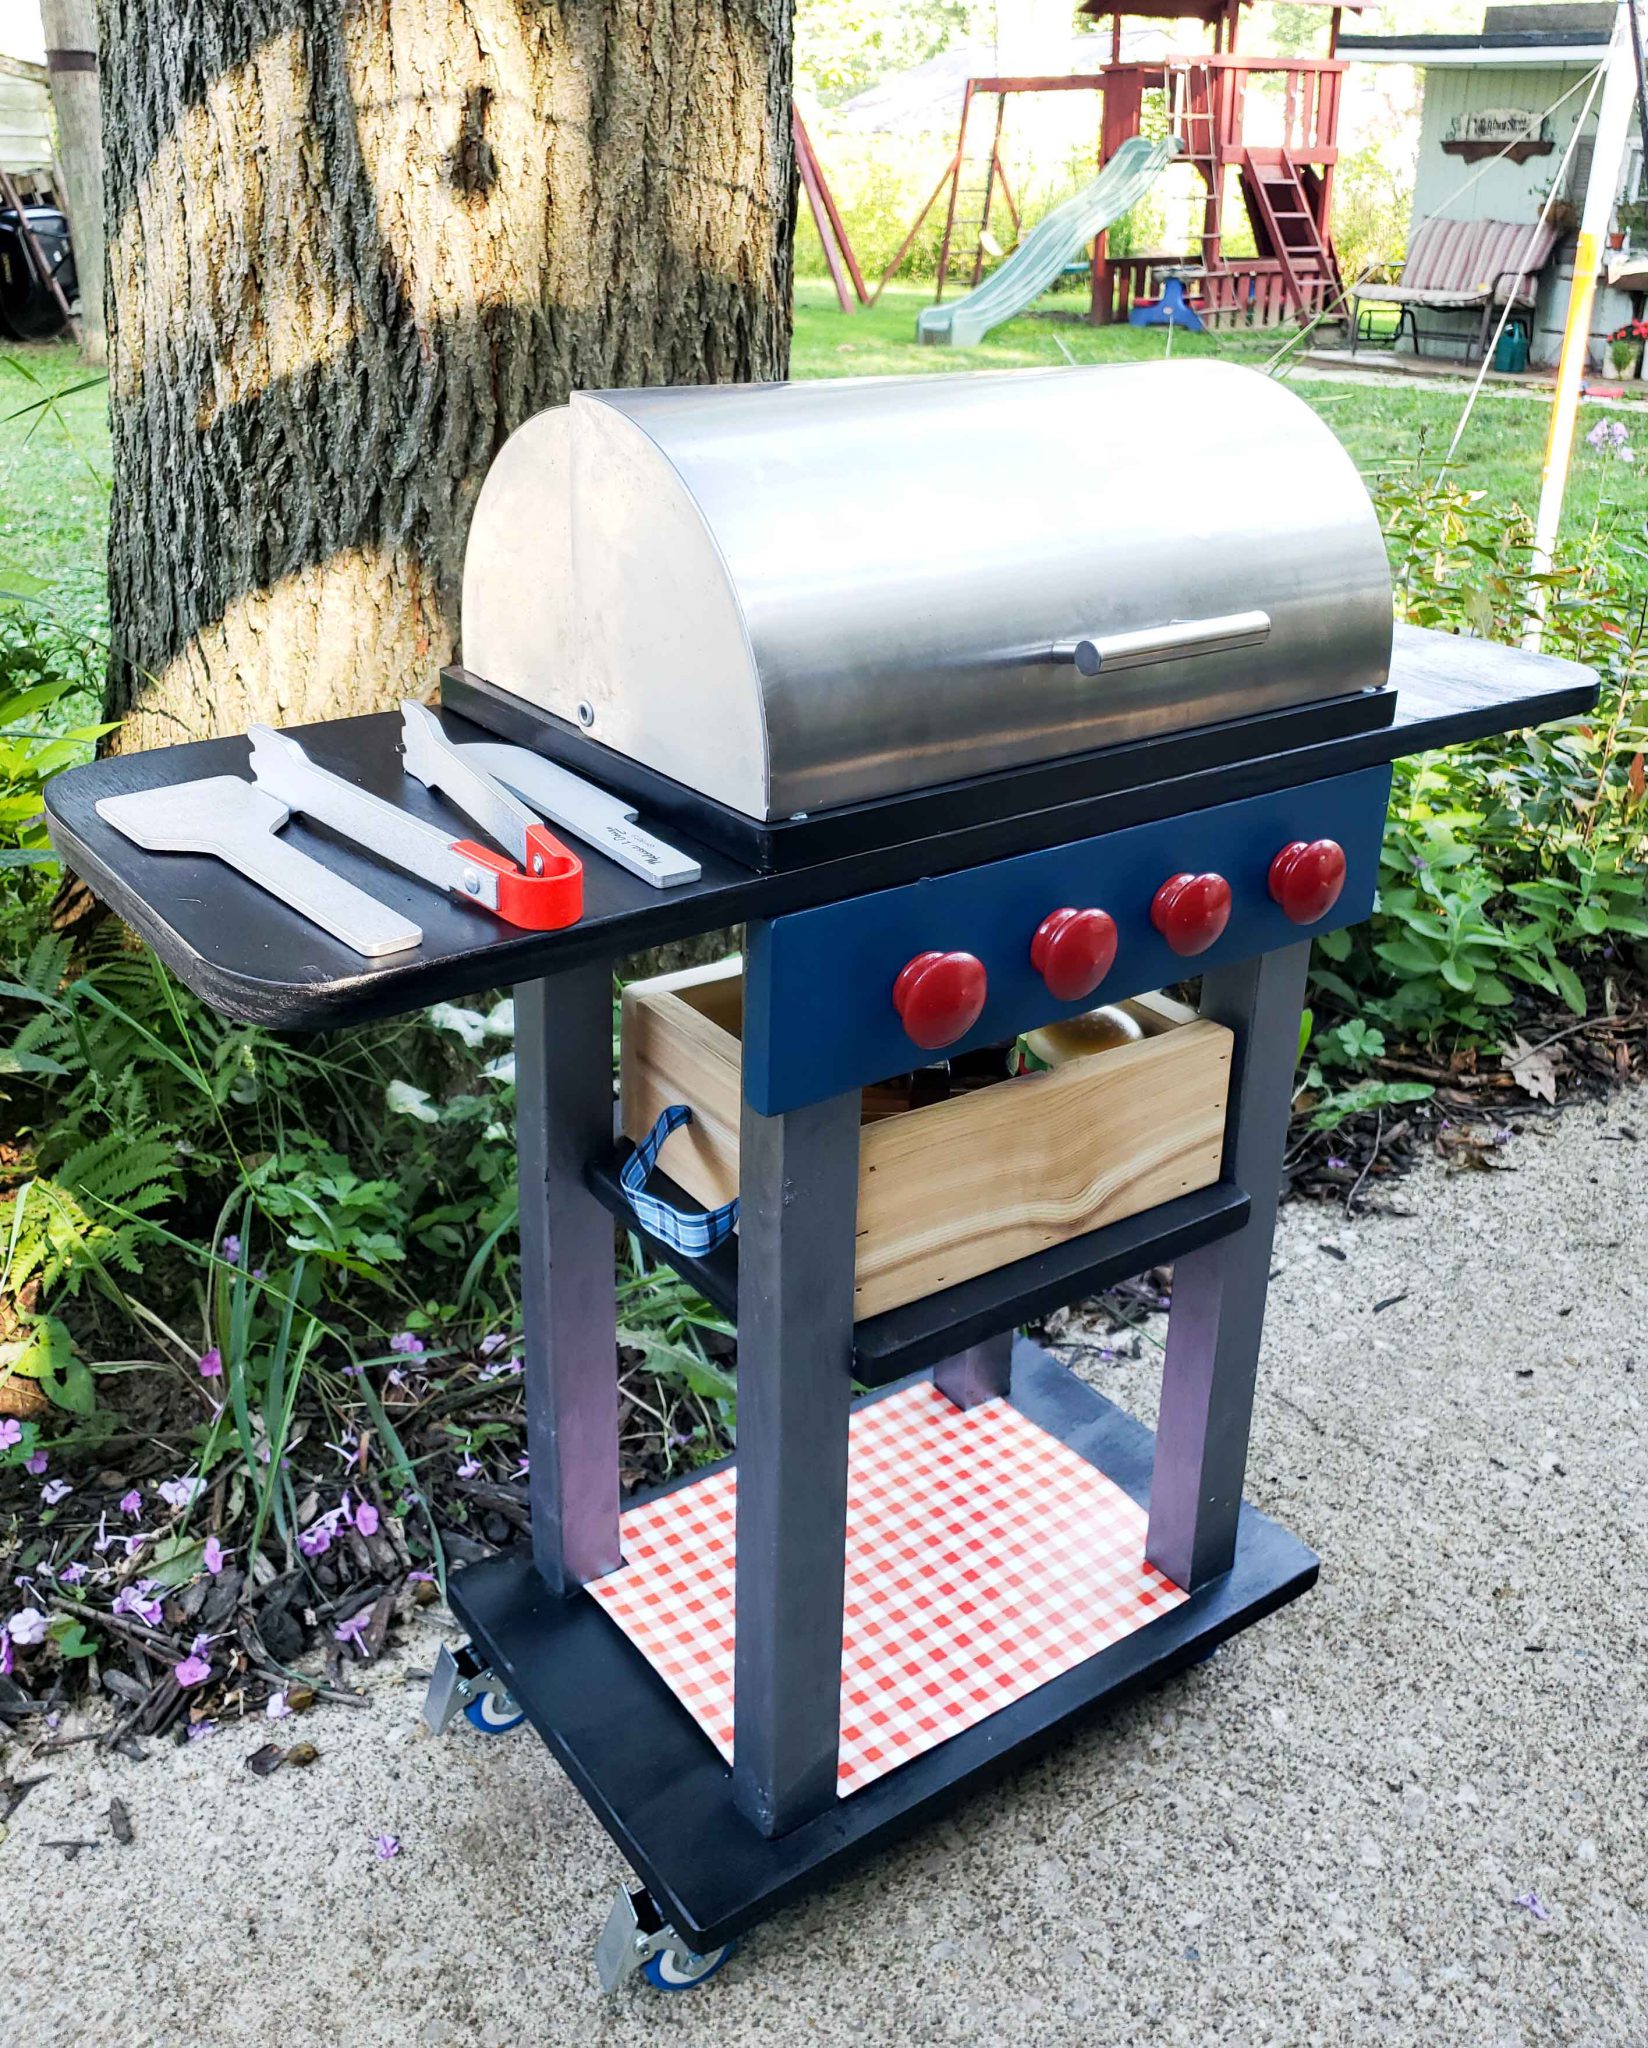 Handmade Toy Grill Set Created by Larissa of Prodigal Pieces | prodigalpieces.com #prodigalpieces #handmade #home #toys #kids